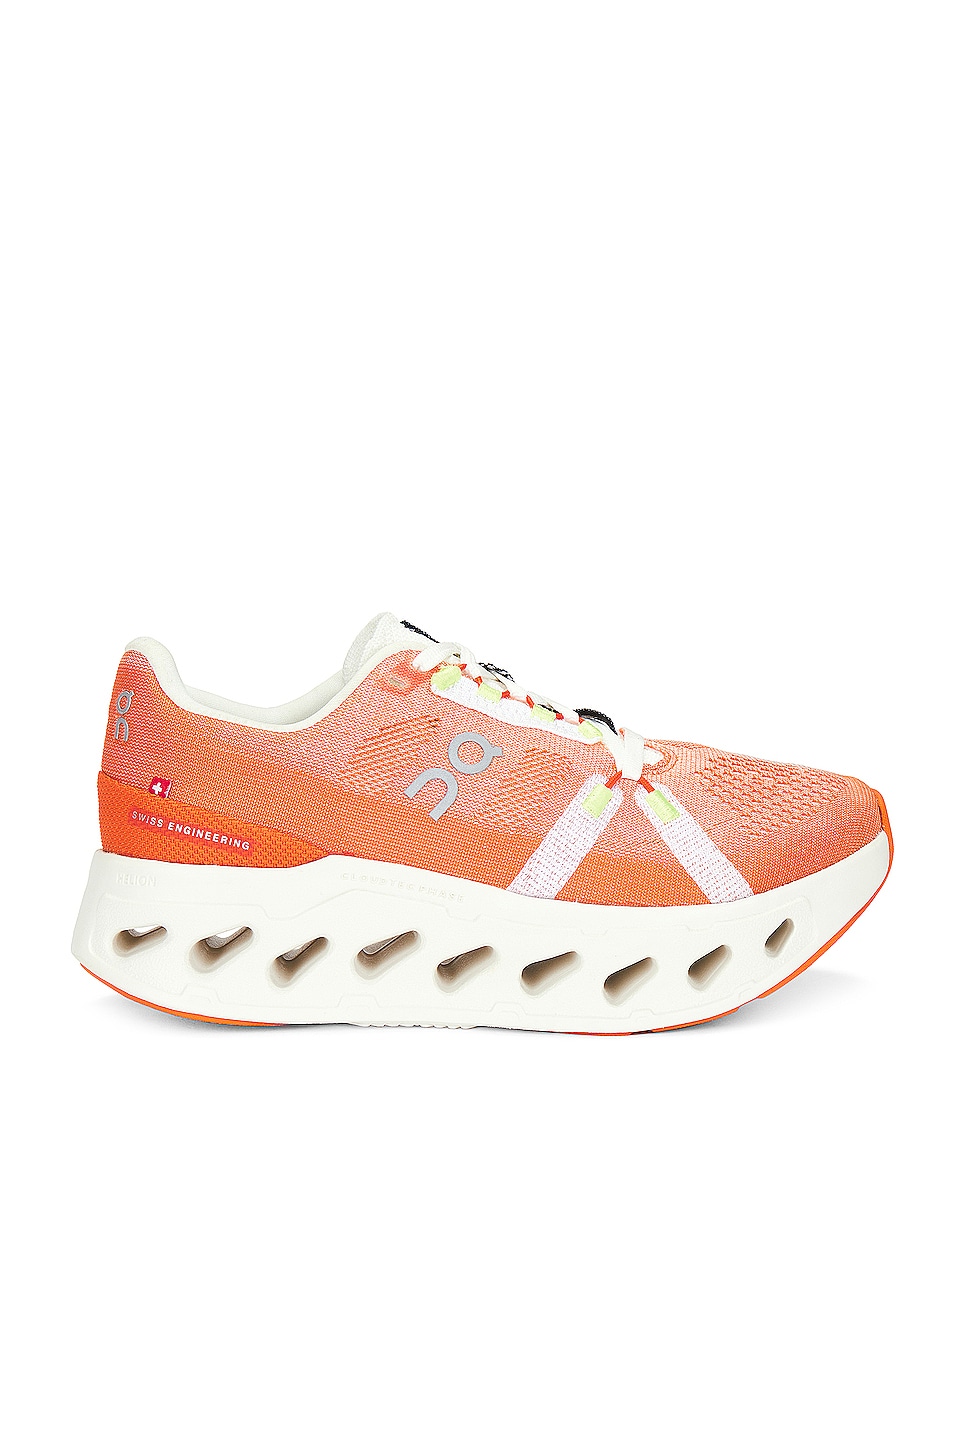 Image 1 of On Cloudeclipse Sneaker in Flame & Ivory